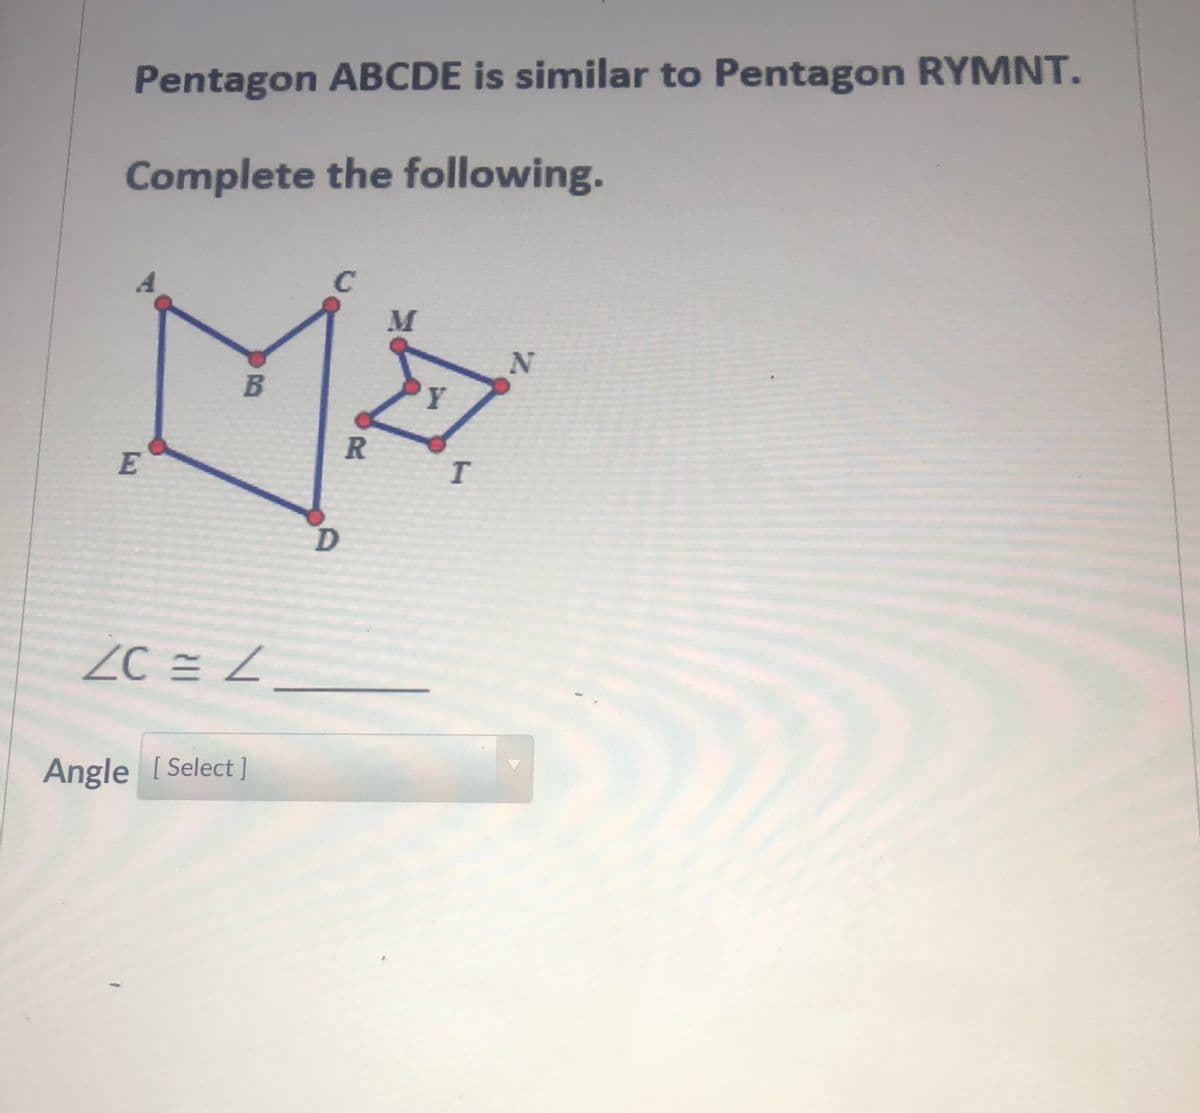 Pentagon ABCDE is similar to Pentagon RYMNT.
Complete the following.
M
B
Y
R
E
ZC = Z
Angle [ Select ]
